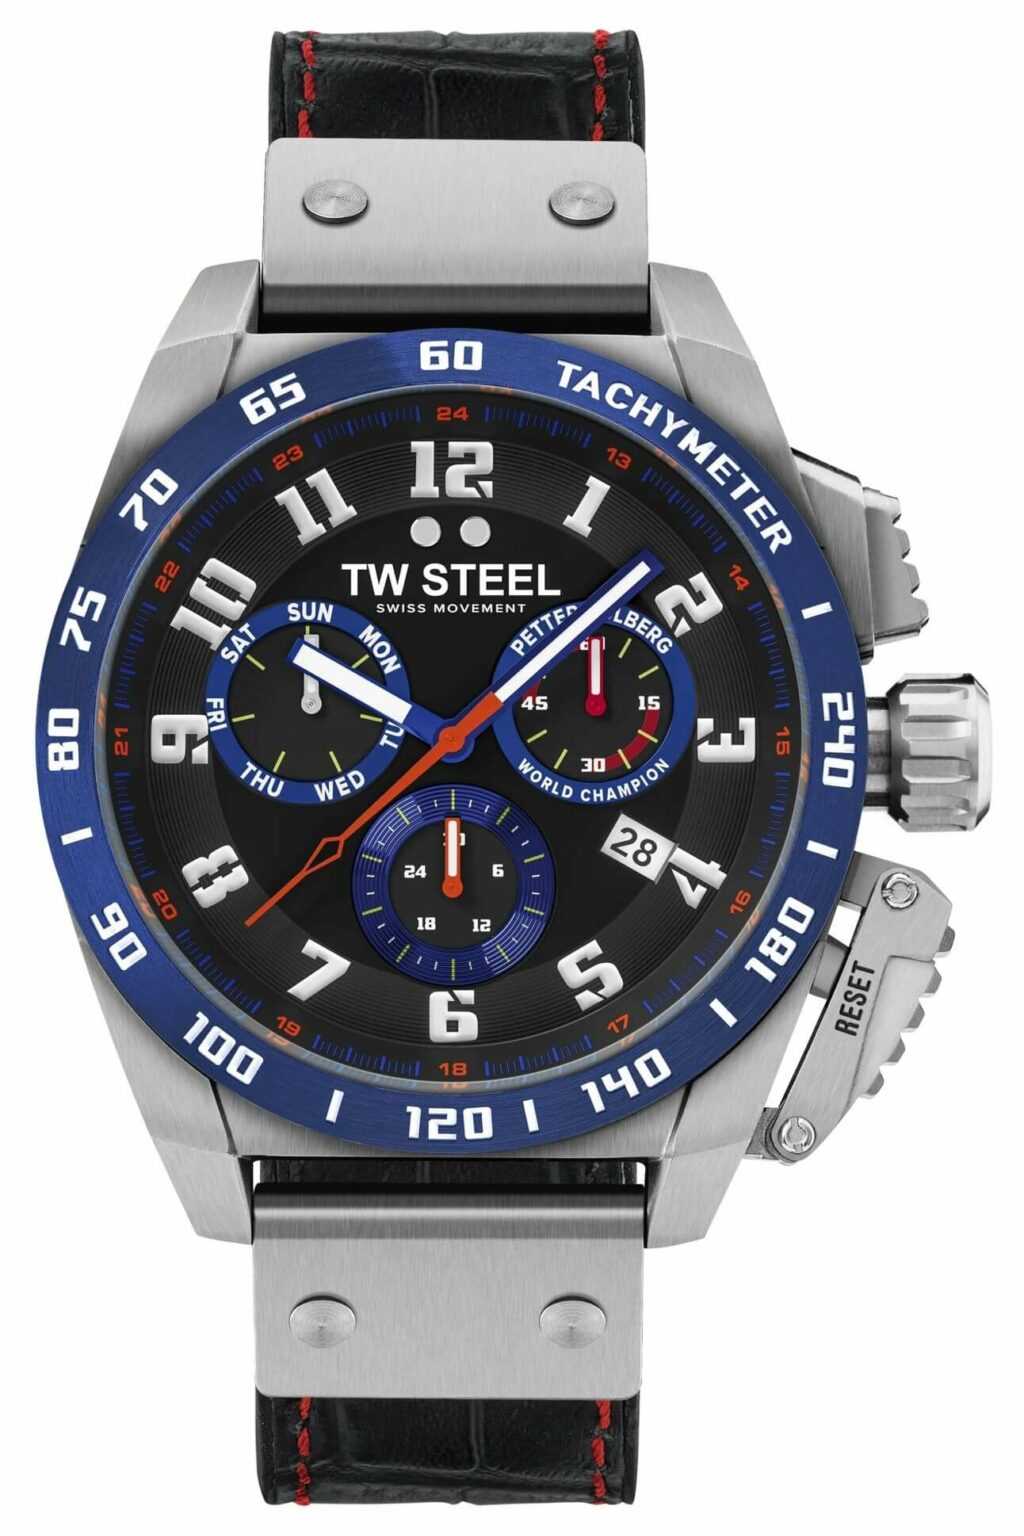 TW STEEL -Fast Lane Special Edition 46mm- TW1019